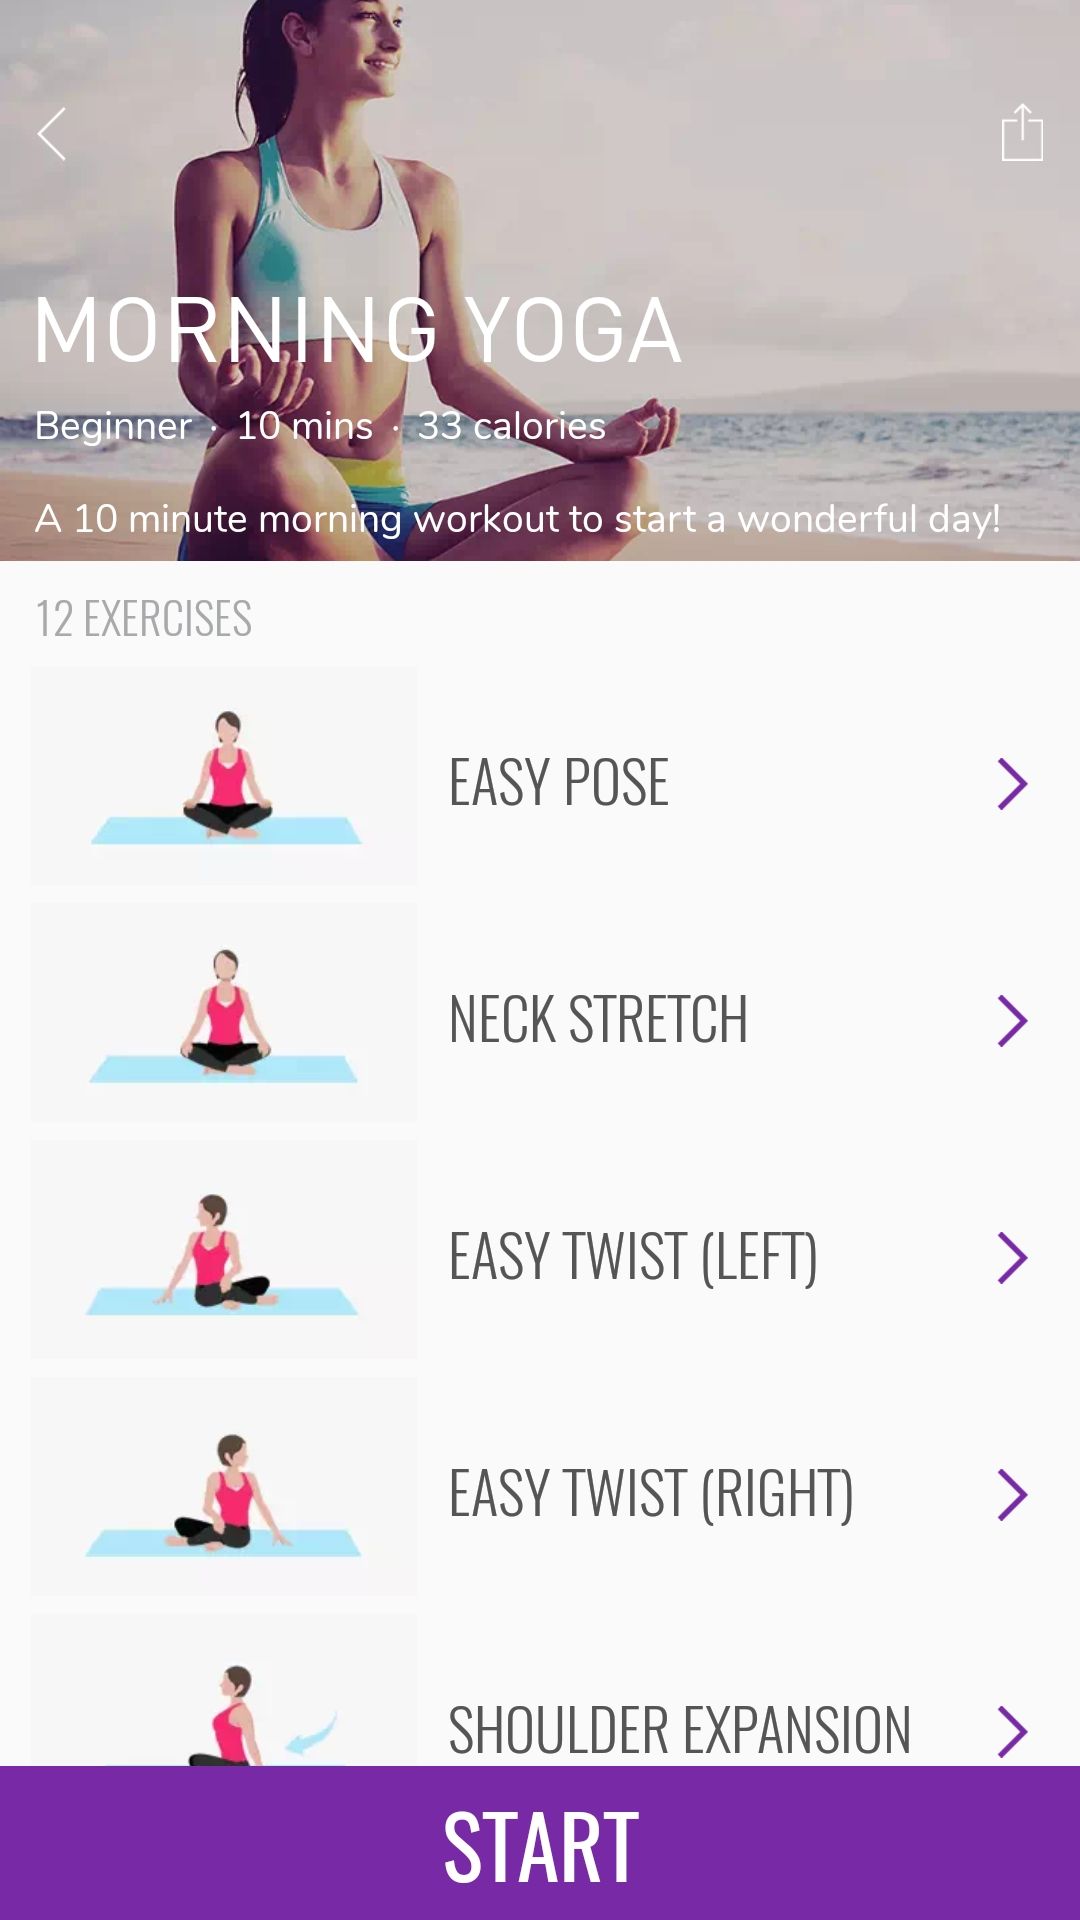 Yoga by 7M mobile yoga fitness app morning workout